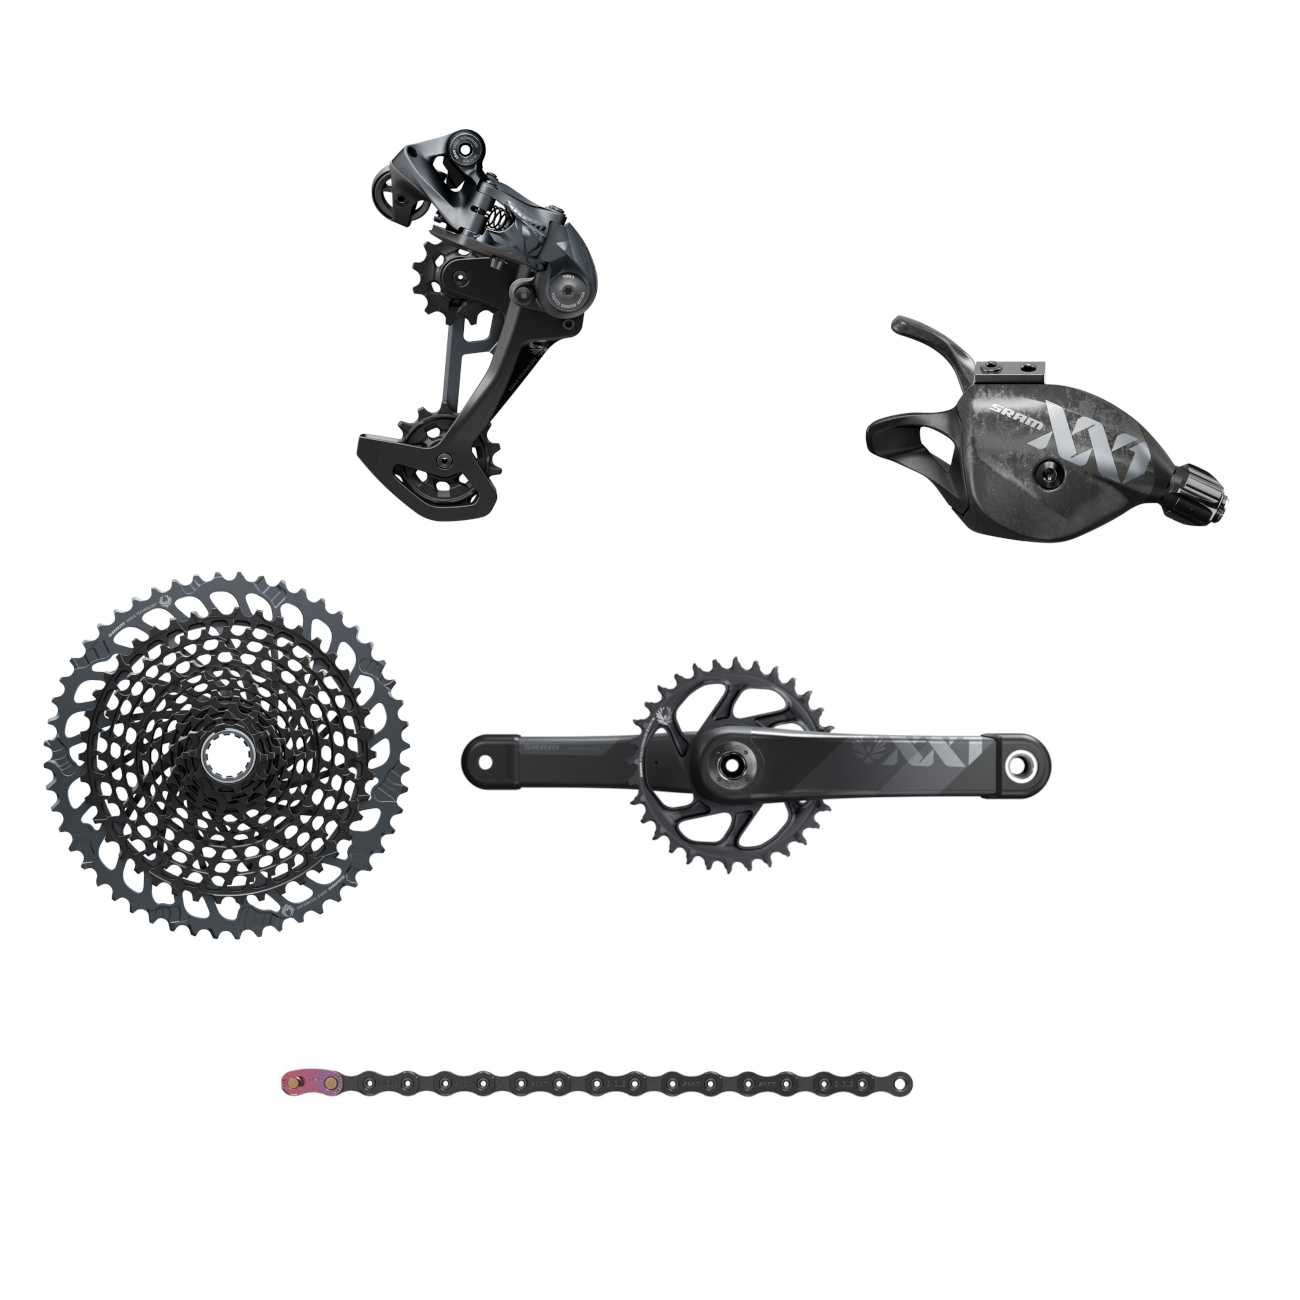 Picture of SRAM XX1 Eagle Boost Groupset - 1x12-speed - Trigger Shifter - 10-52 t. XG-1295 Cassette - black